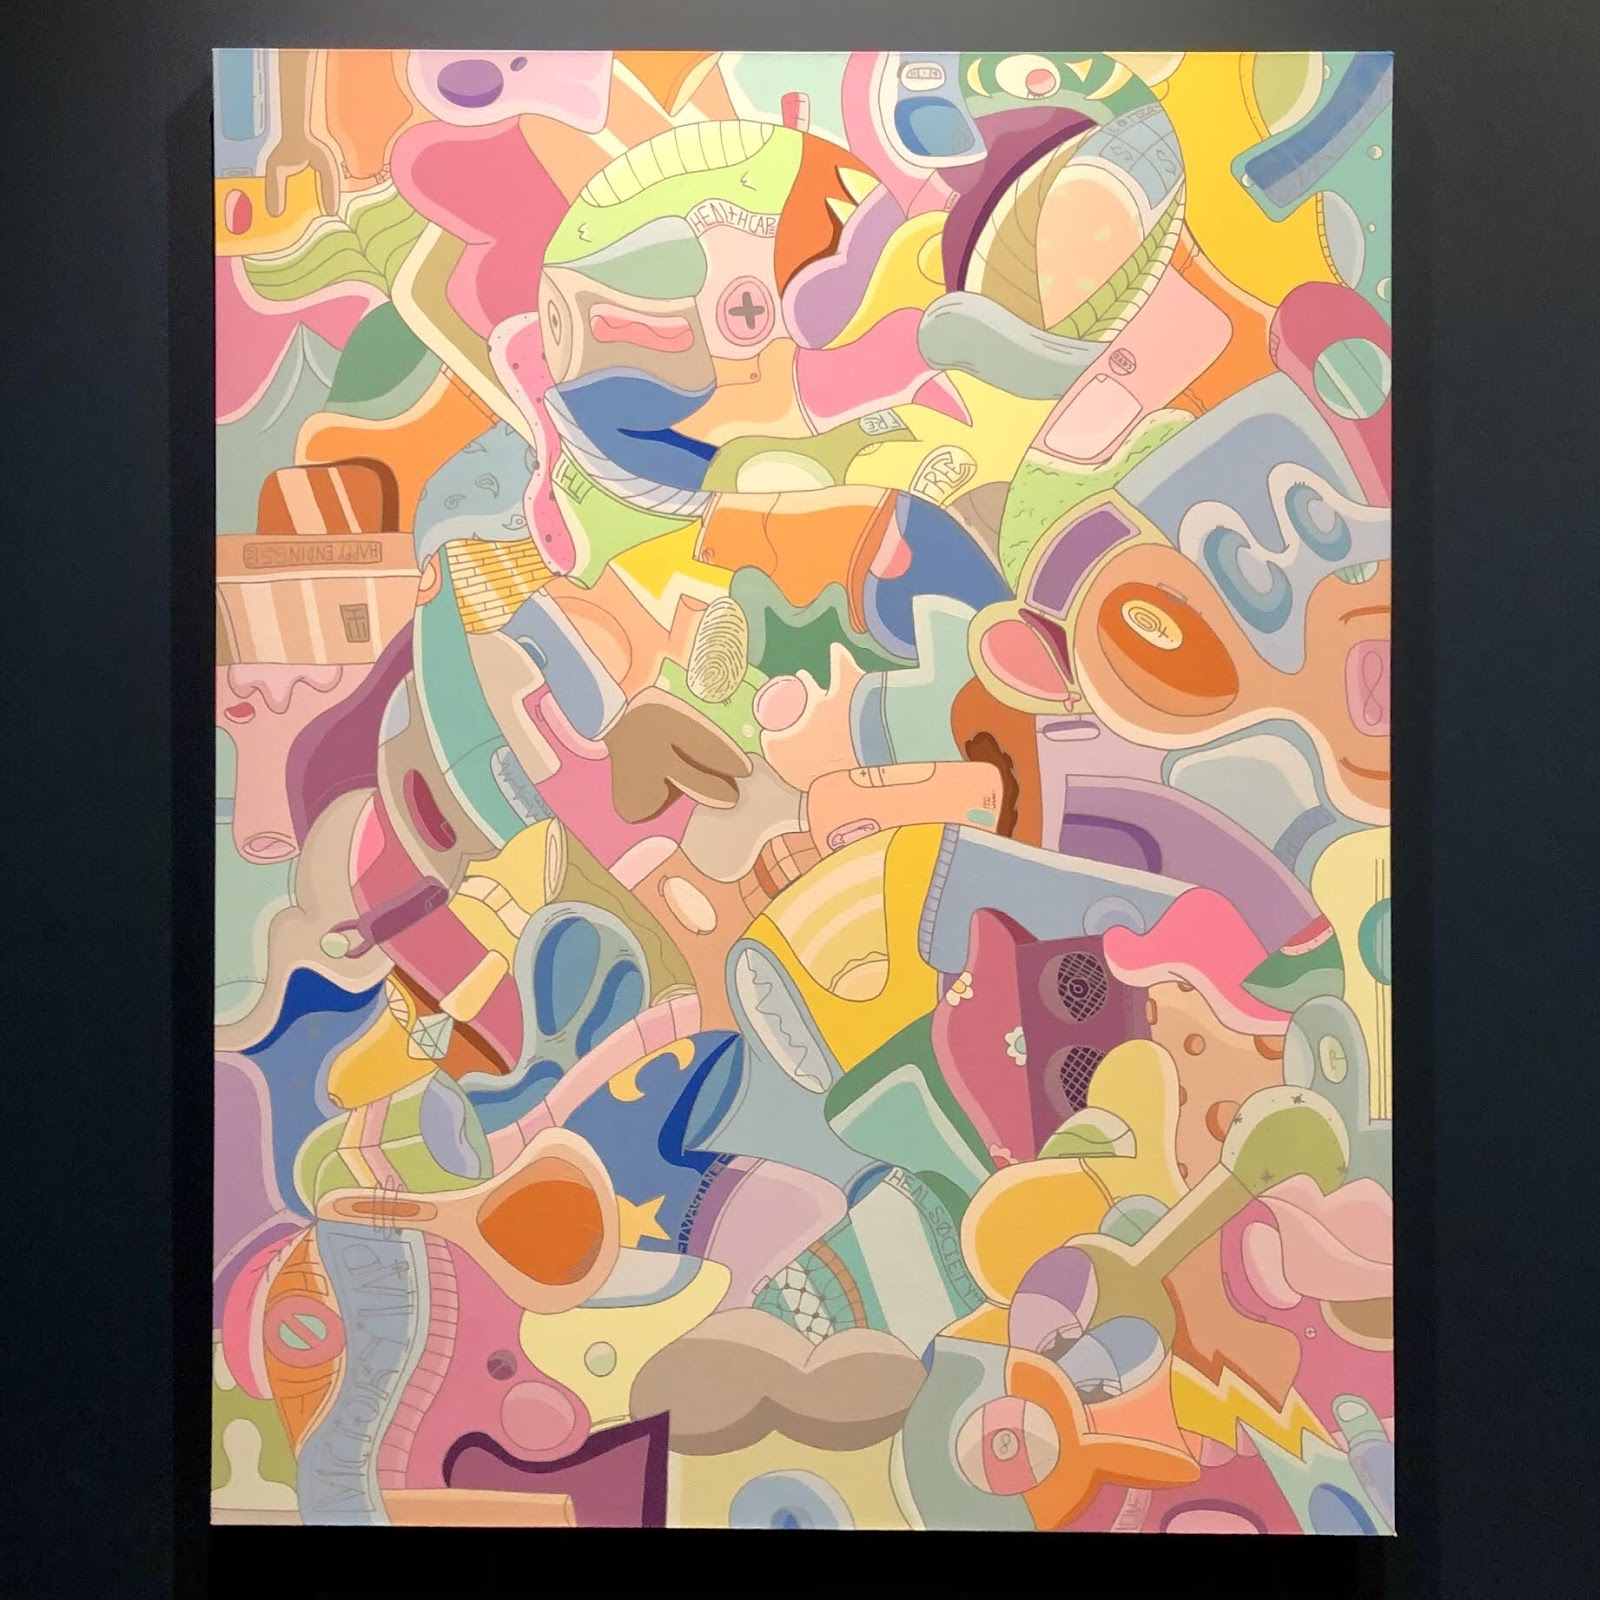 Up Here, 2020, Acrylic on canvas, 48” x 60”